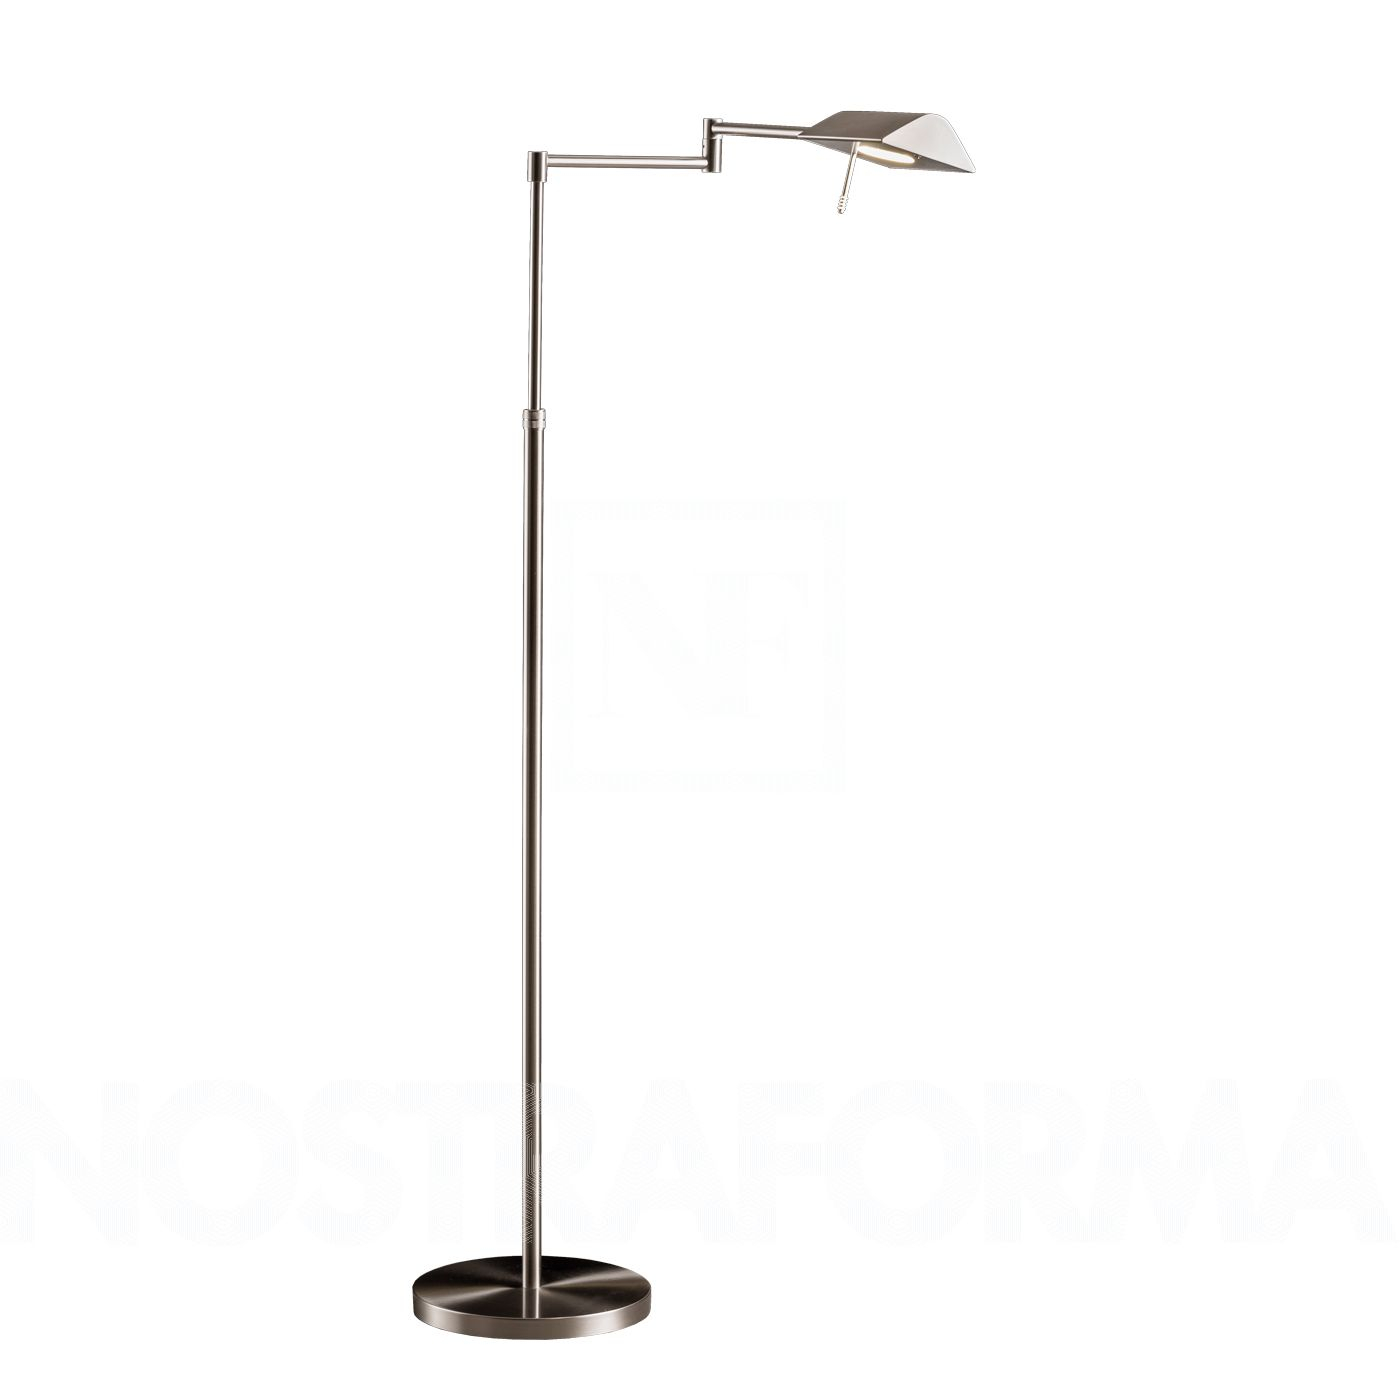 Holtktter 9602 Floor Lamp pertaining to dimensions 1400 X 1400